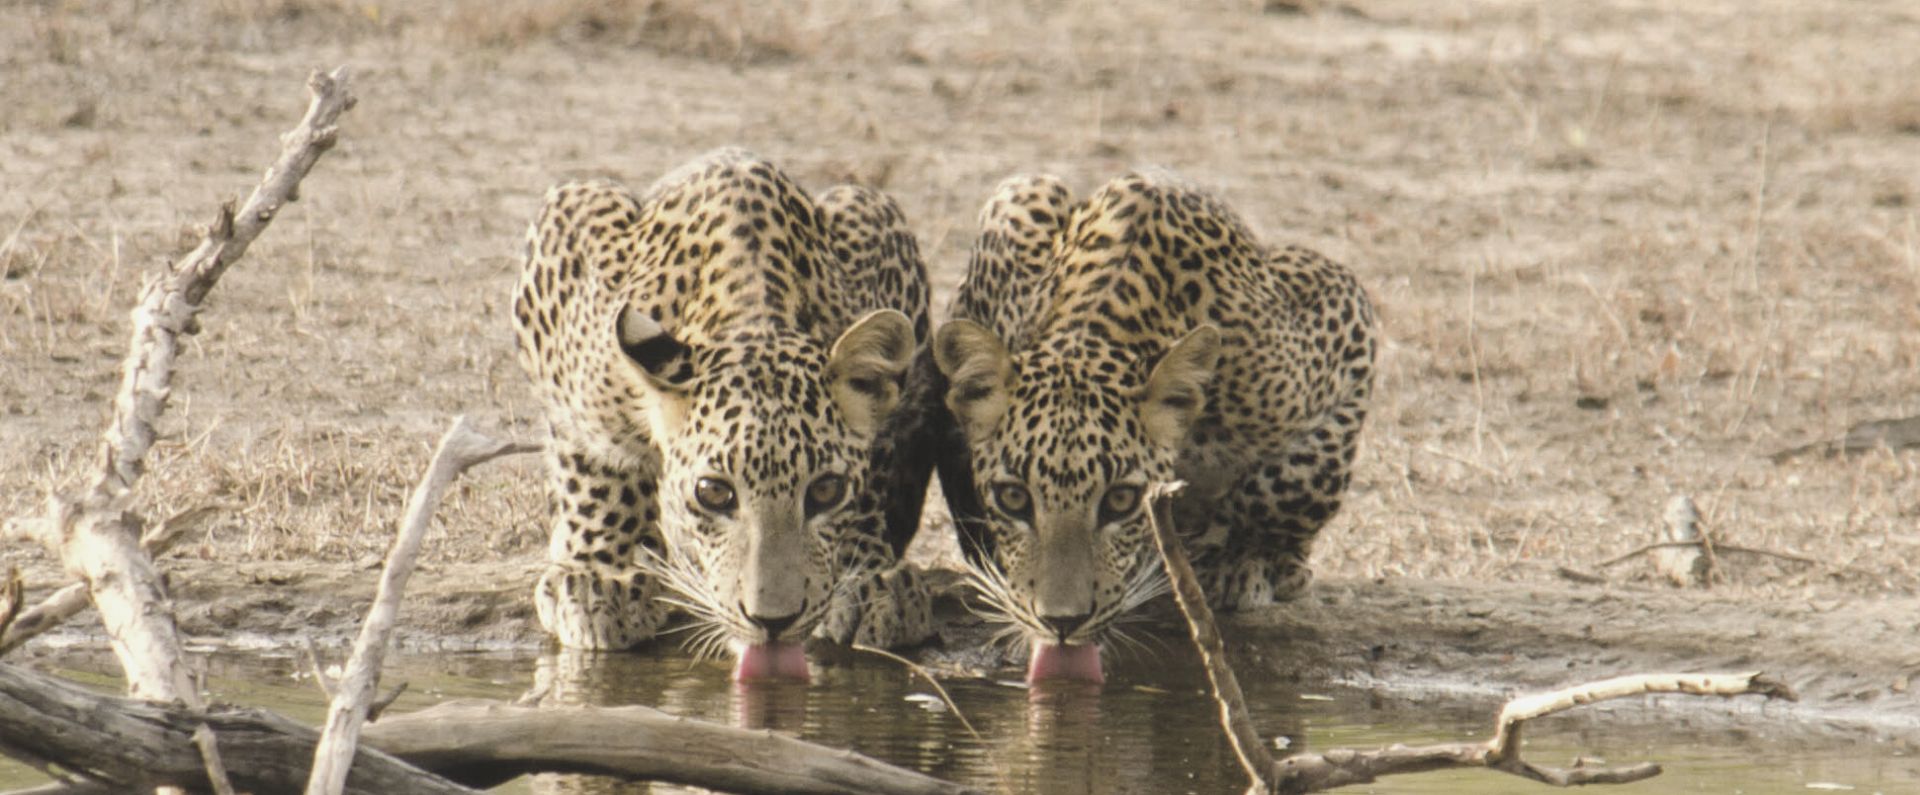 Two leopards drinking water